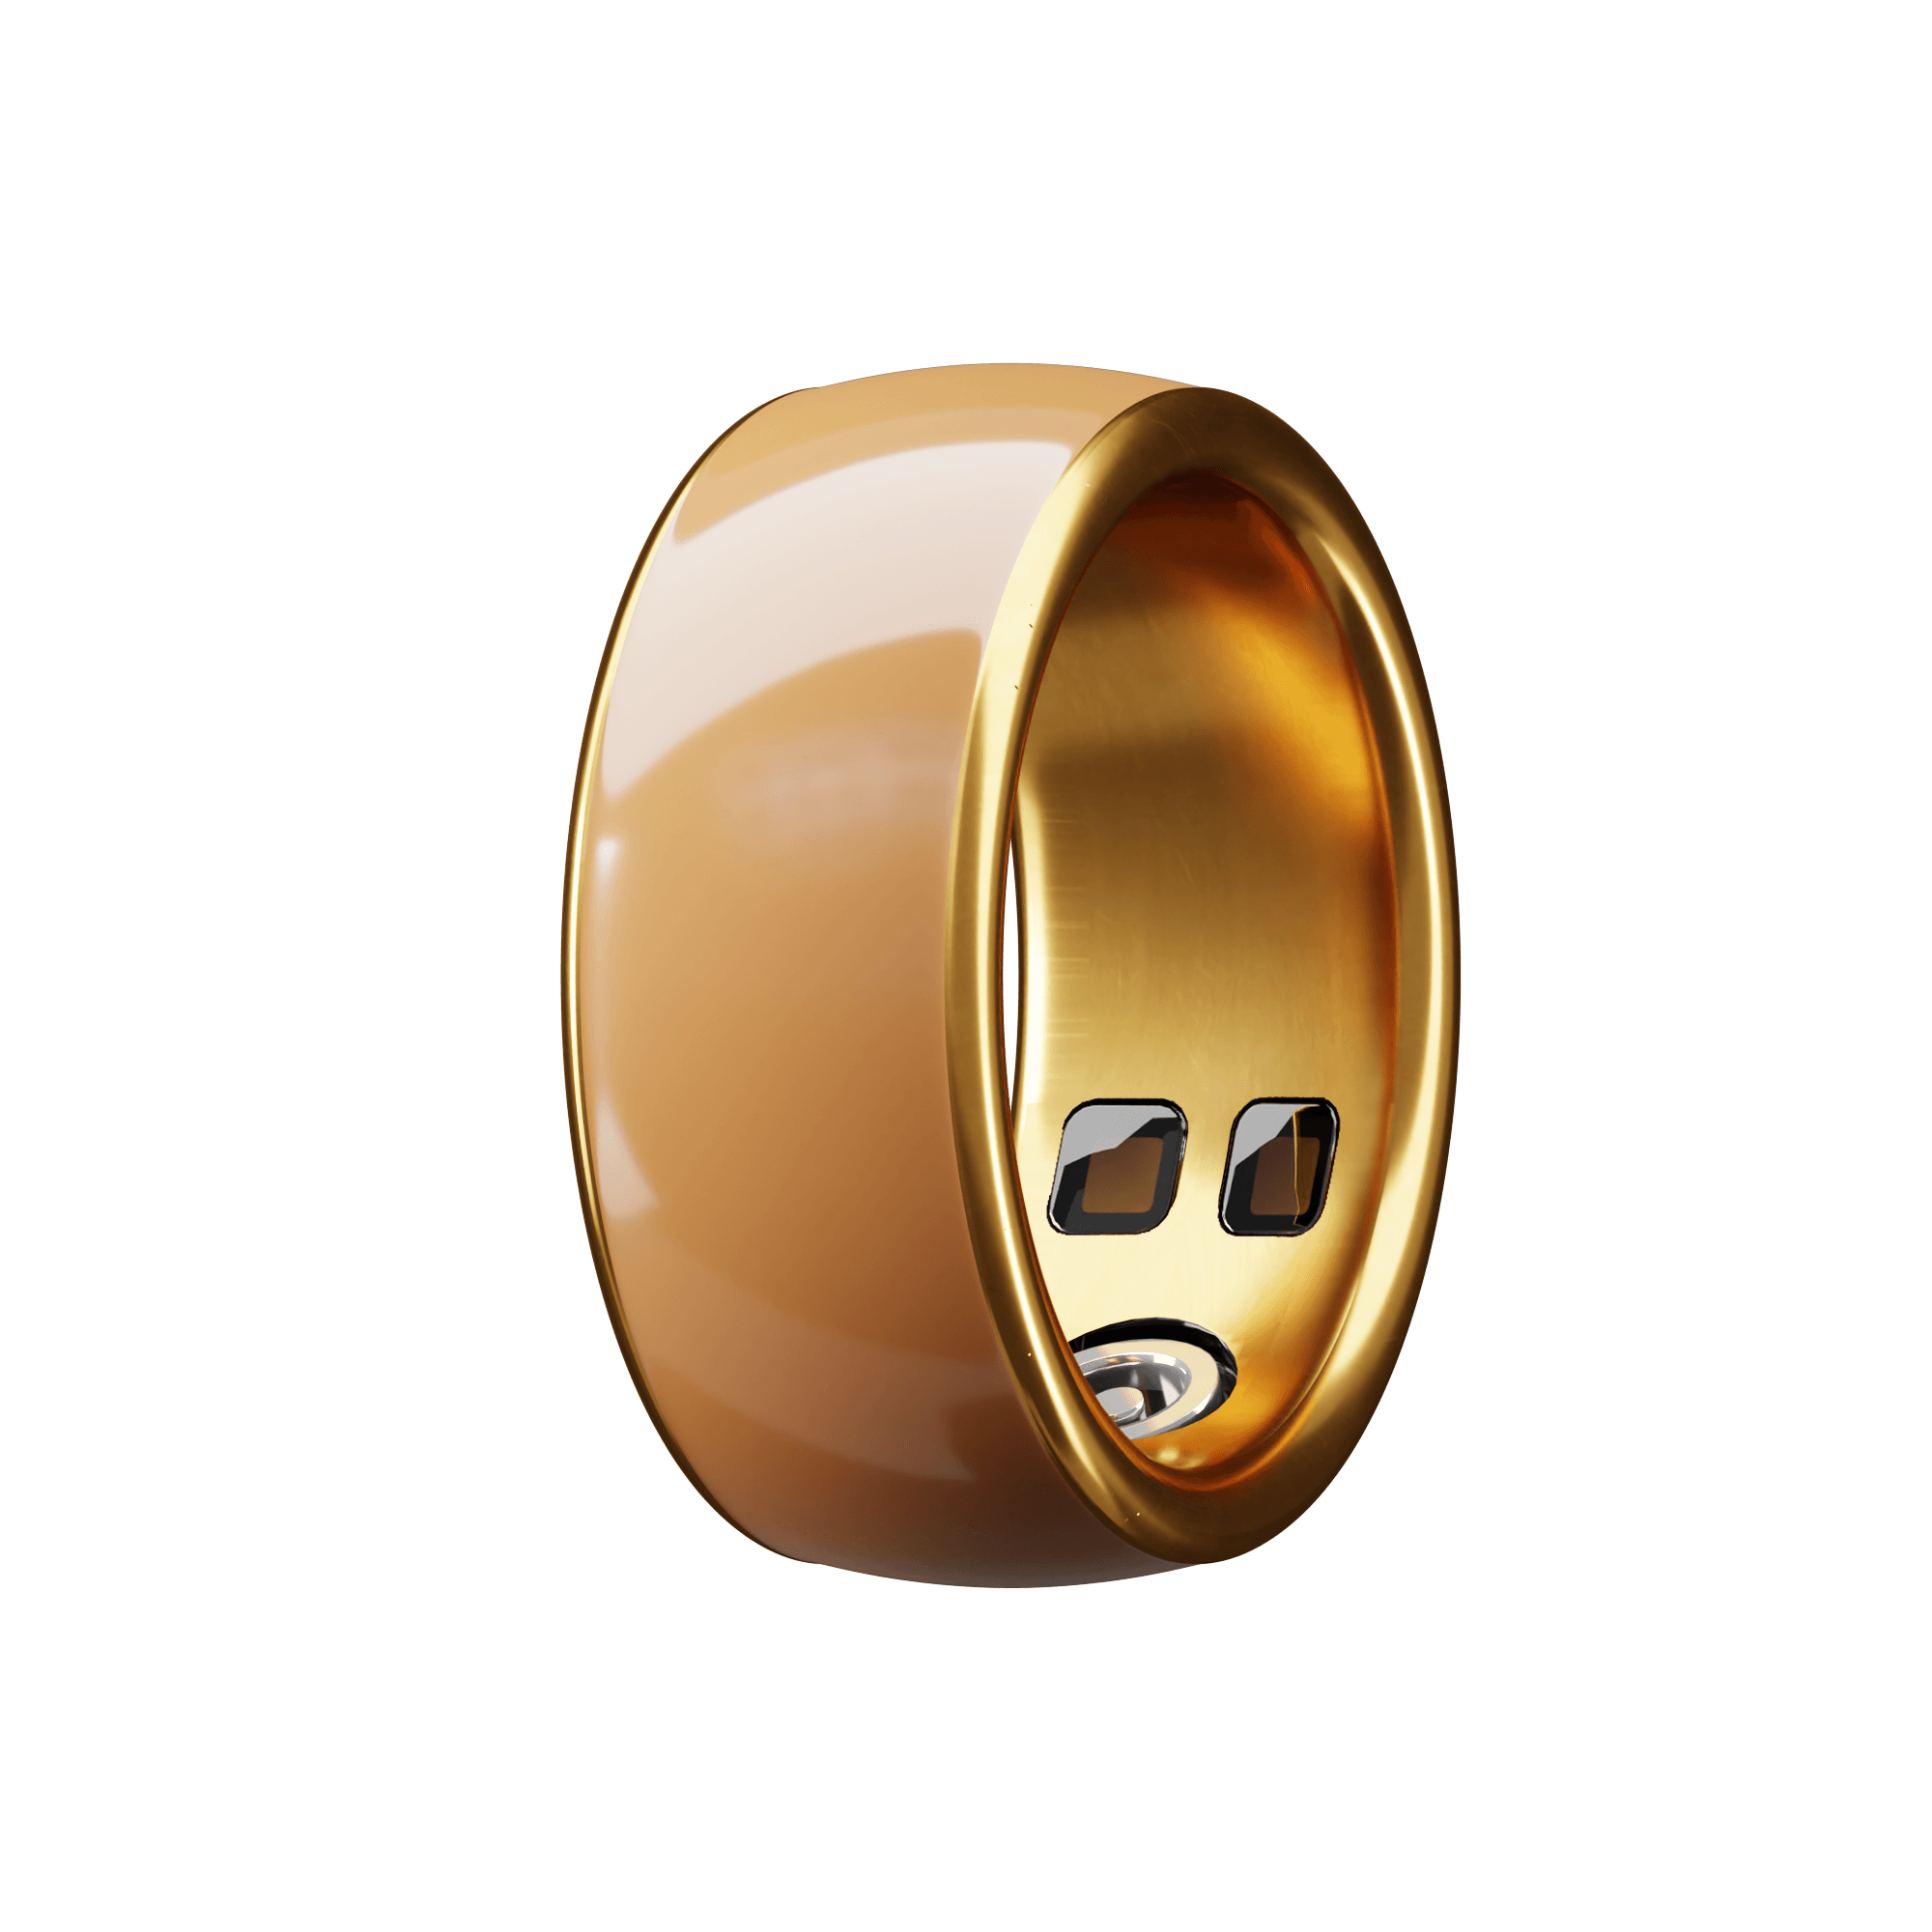 Pi Ring - India's First Entry-Level & Affordable Smart Ring – Pi Ring -  India's First Smart Ring for Fitness, Stress, Sleep & Health.